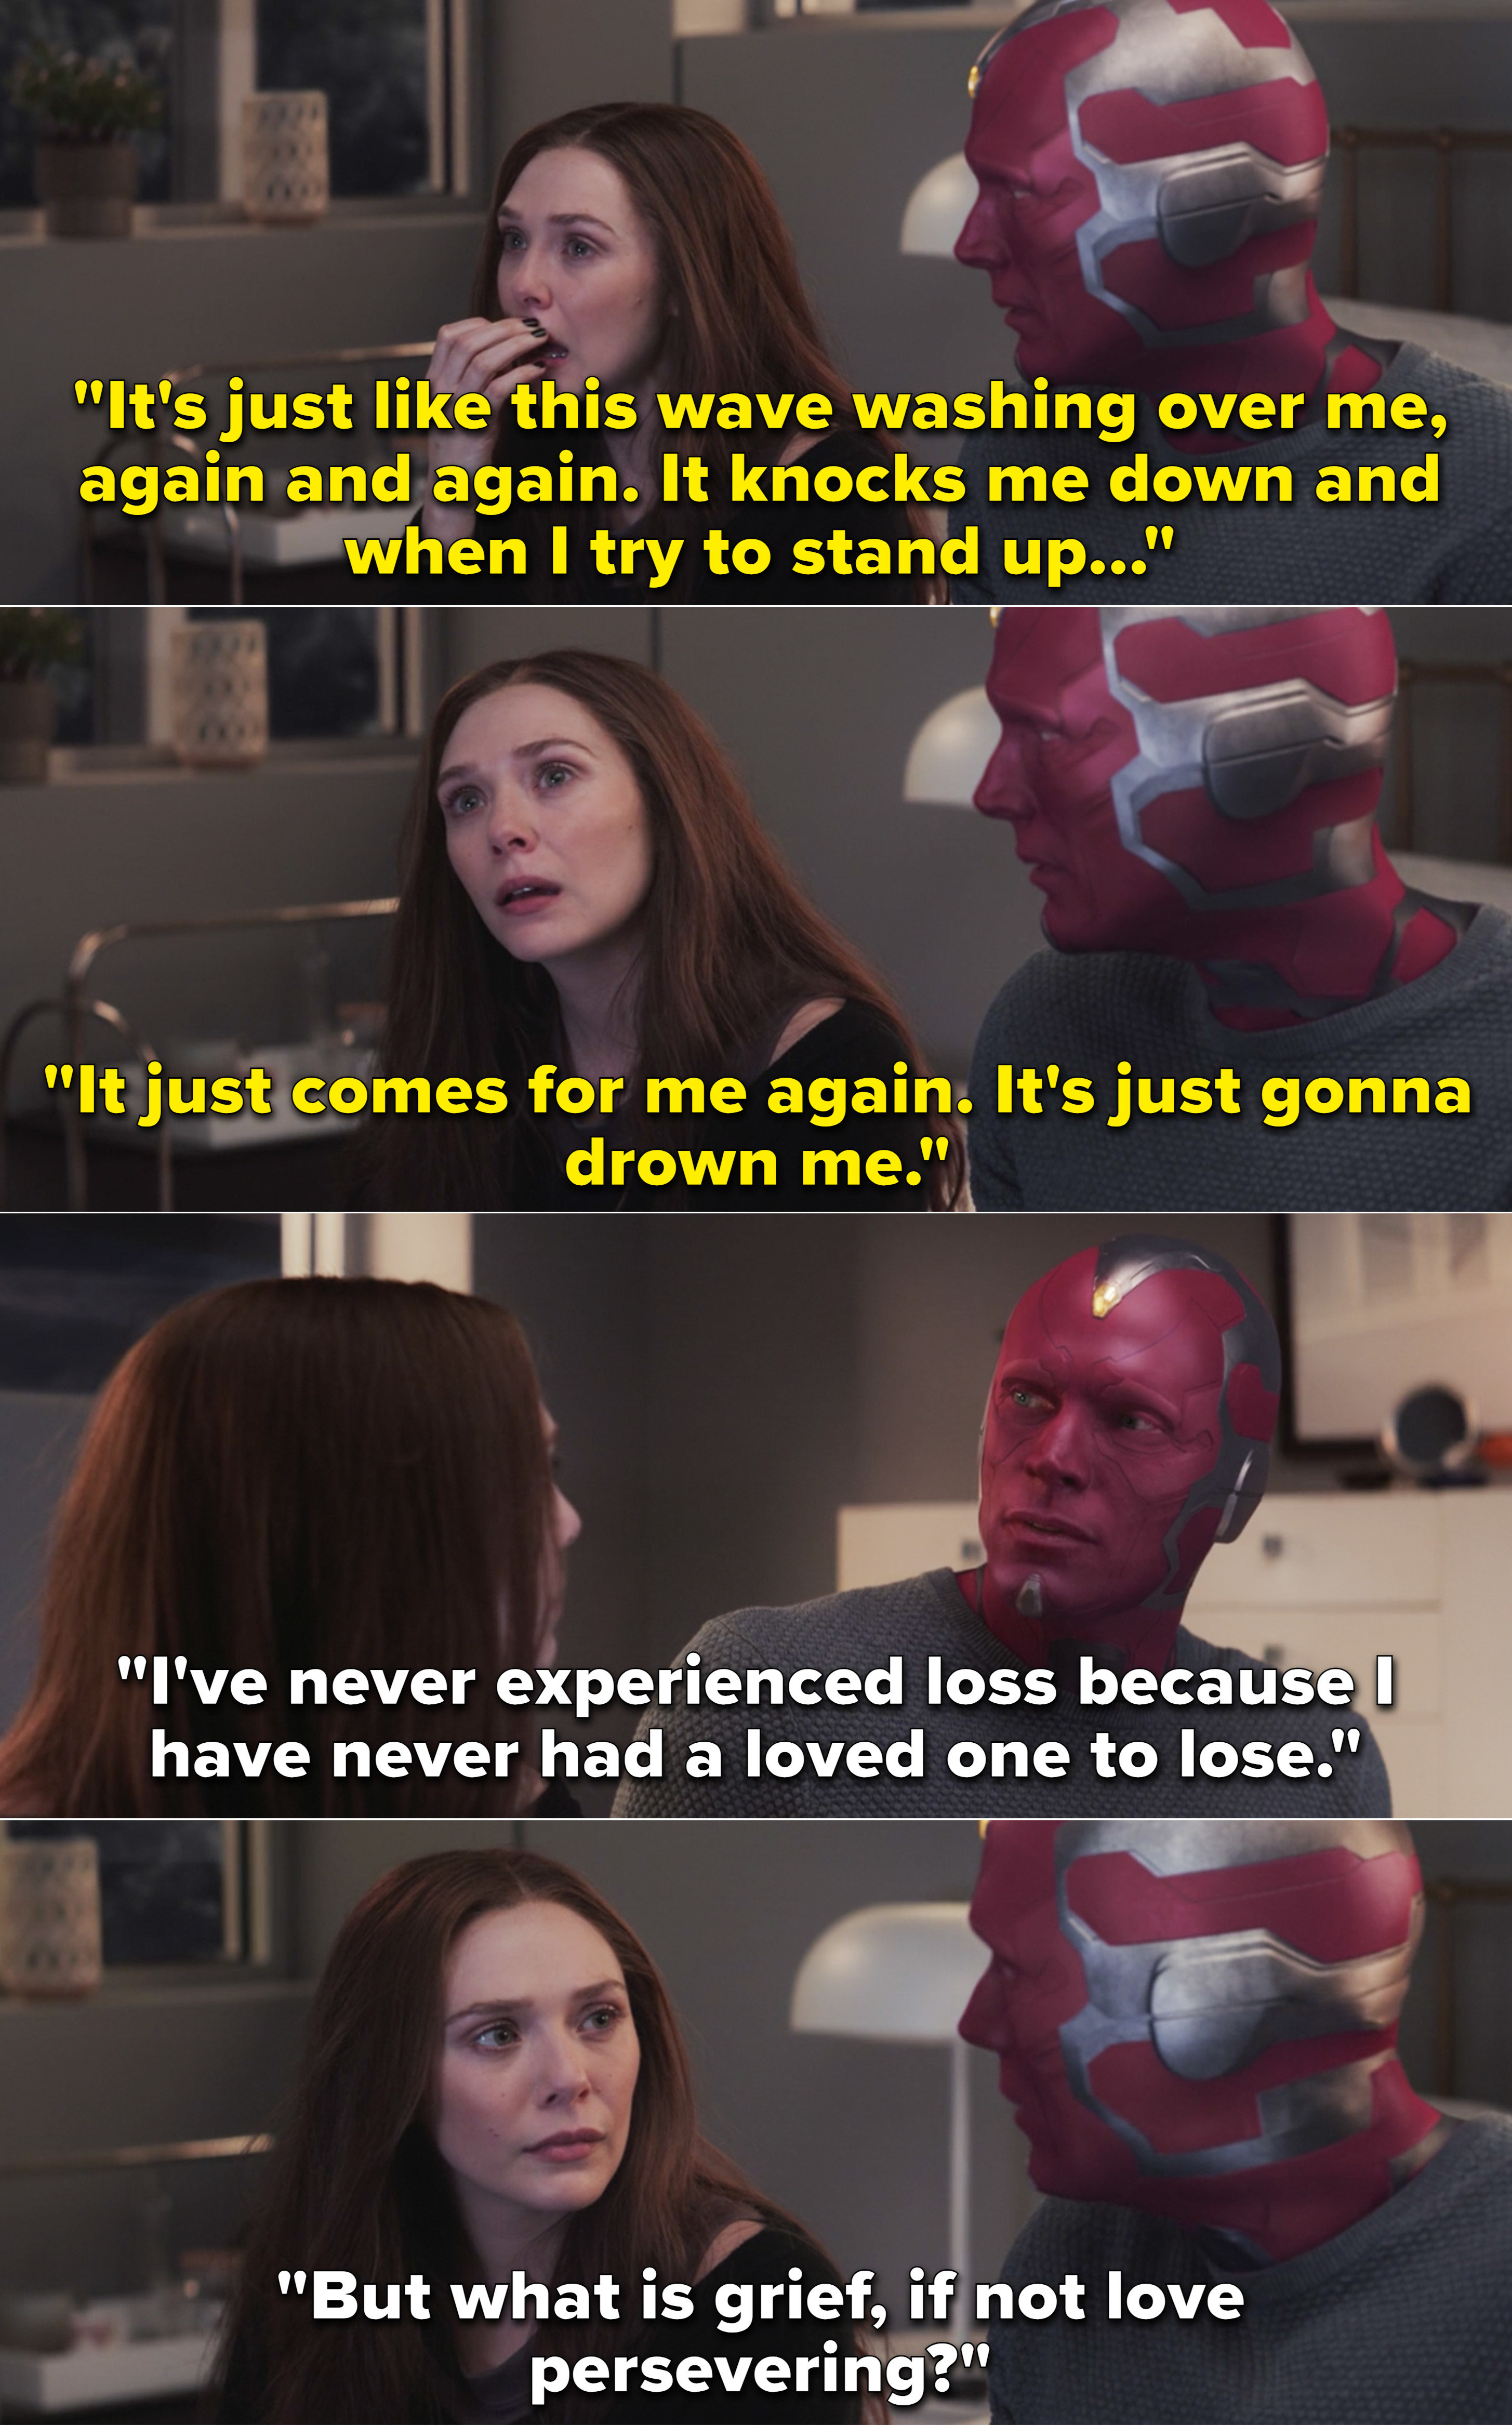 Wanda:&quot;It&#x27;s just like this wave washing over me, again and again, it knocks me down.It&#x27;s gonna drown me. I&#x27;ve never experienced loss because I have never had a loved one to lose. But what is grief if not love persevering?&quot;